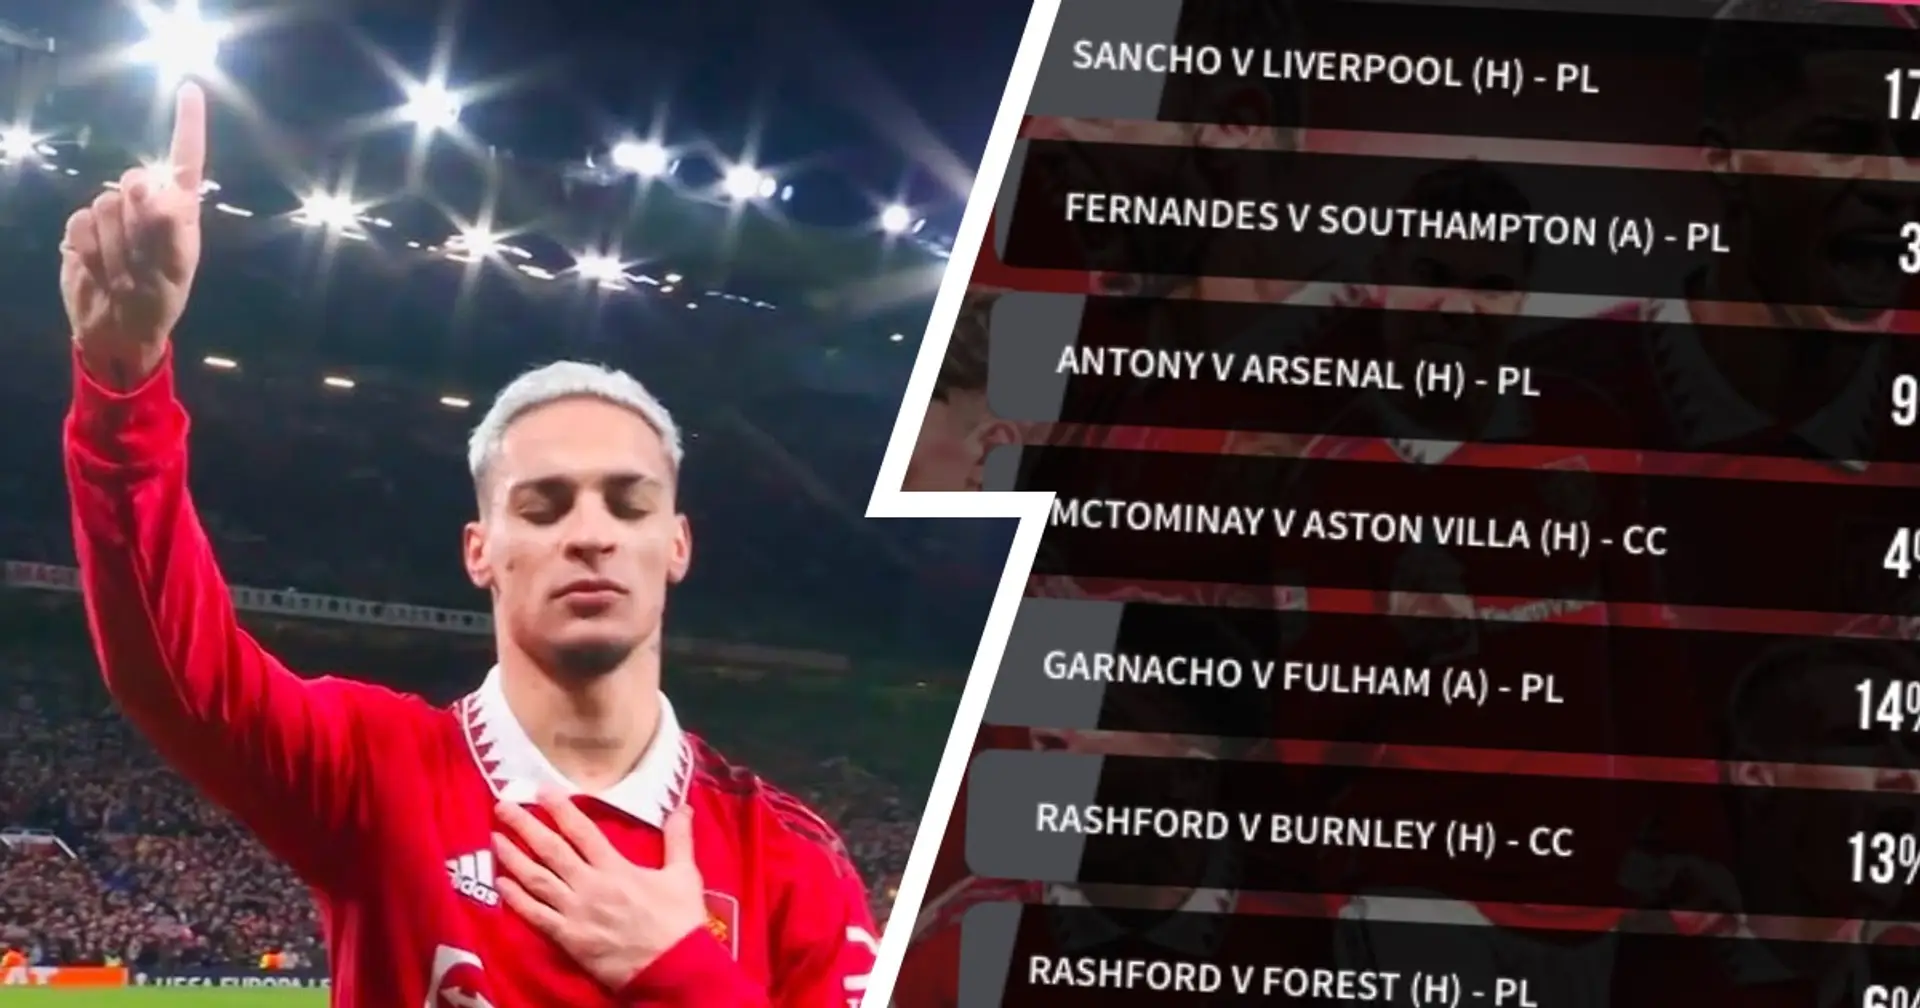 VIDEO: Antony wins Man United's Goal of the Season award - see how fans voted